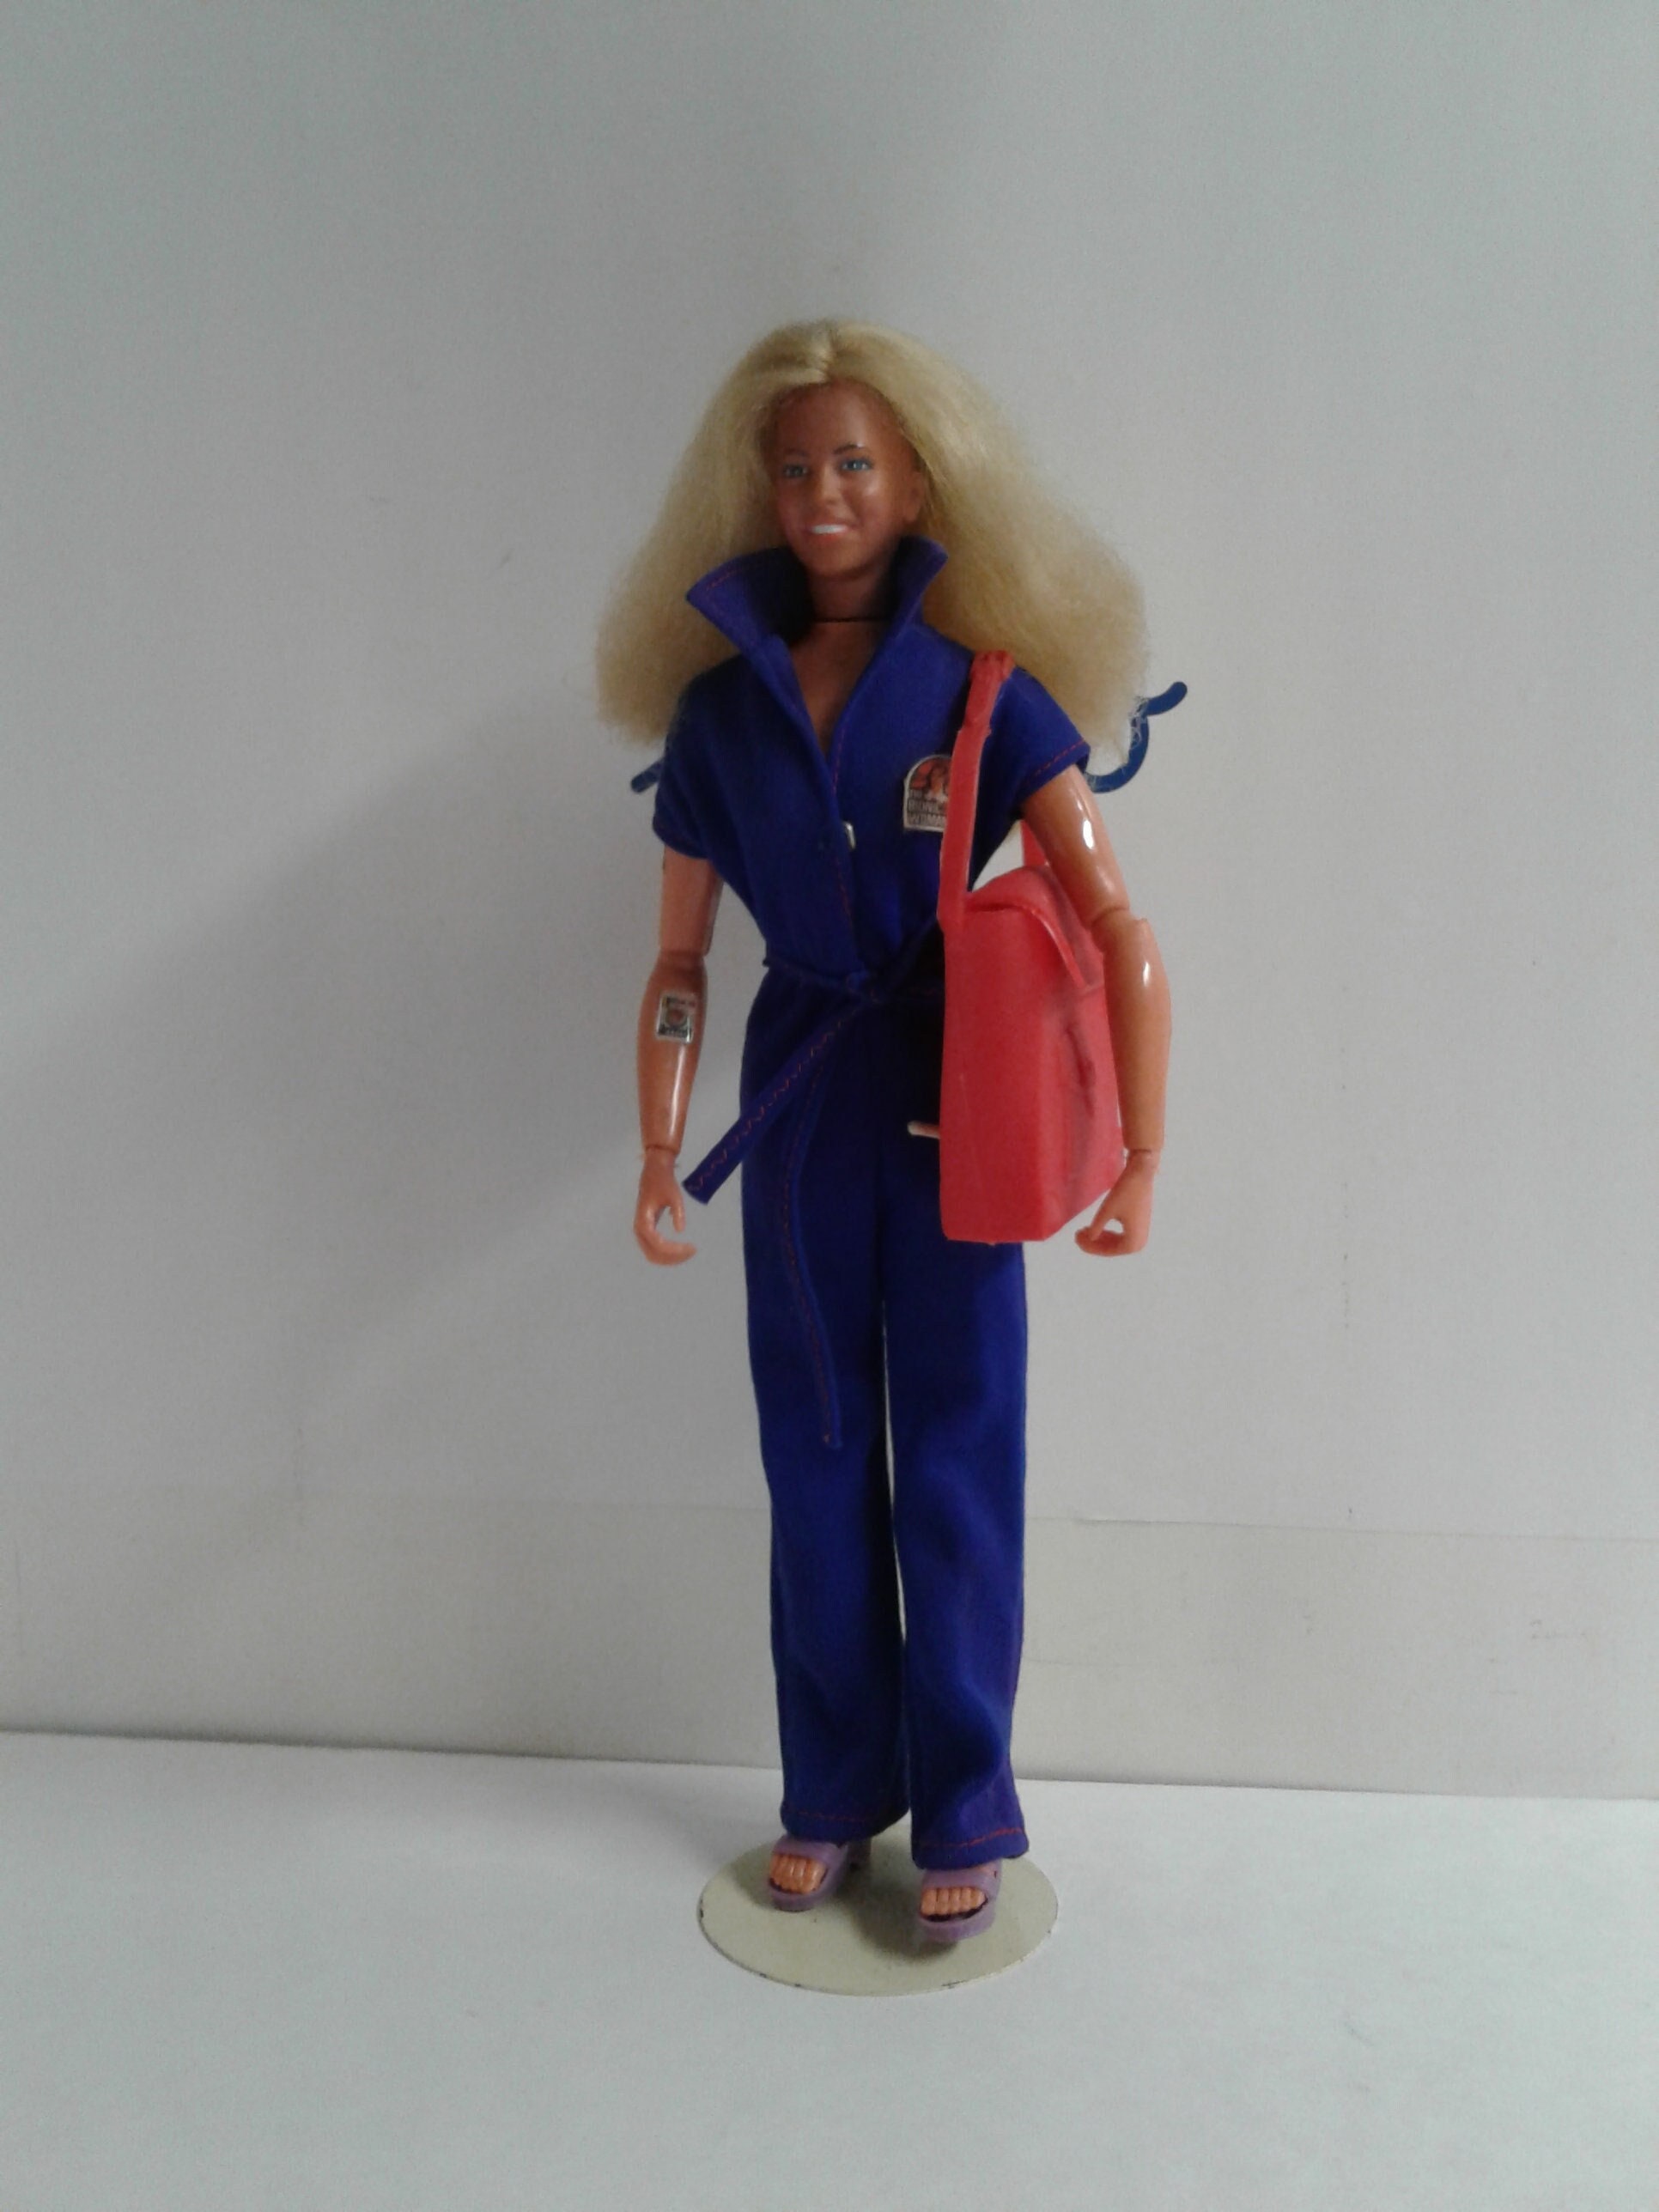 Lindsay Wagner as Jaime Sommers in The Bionic Woman Action Figure Fashions  from the Kenner Toy Catalo…